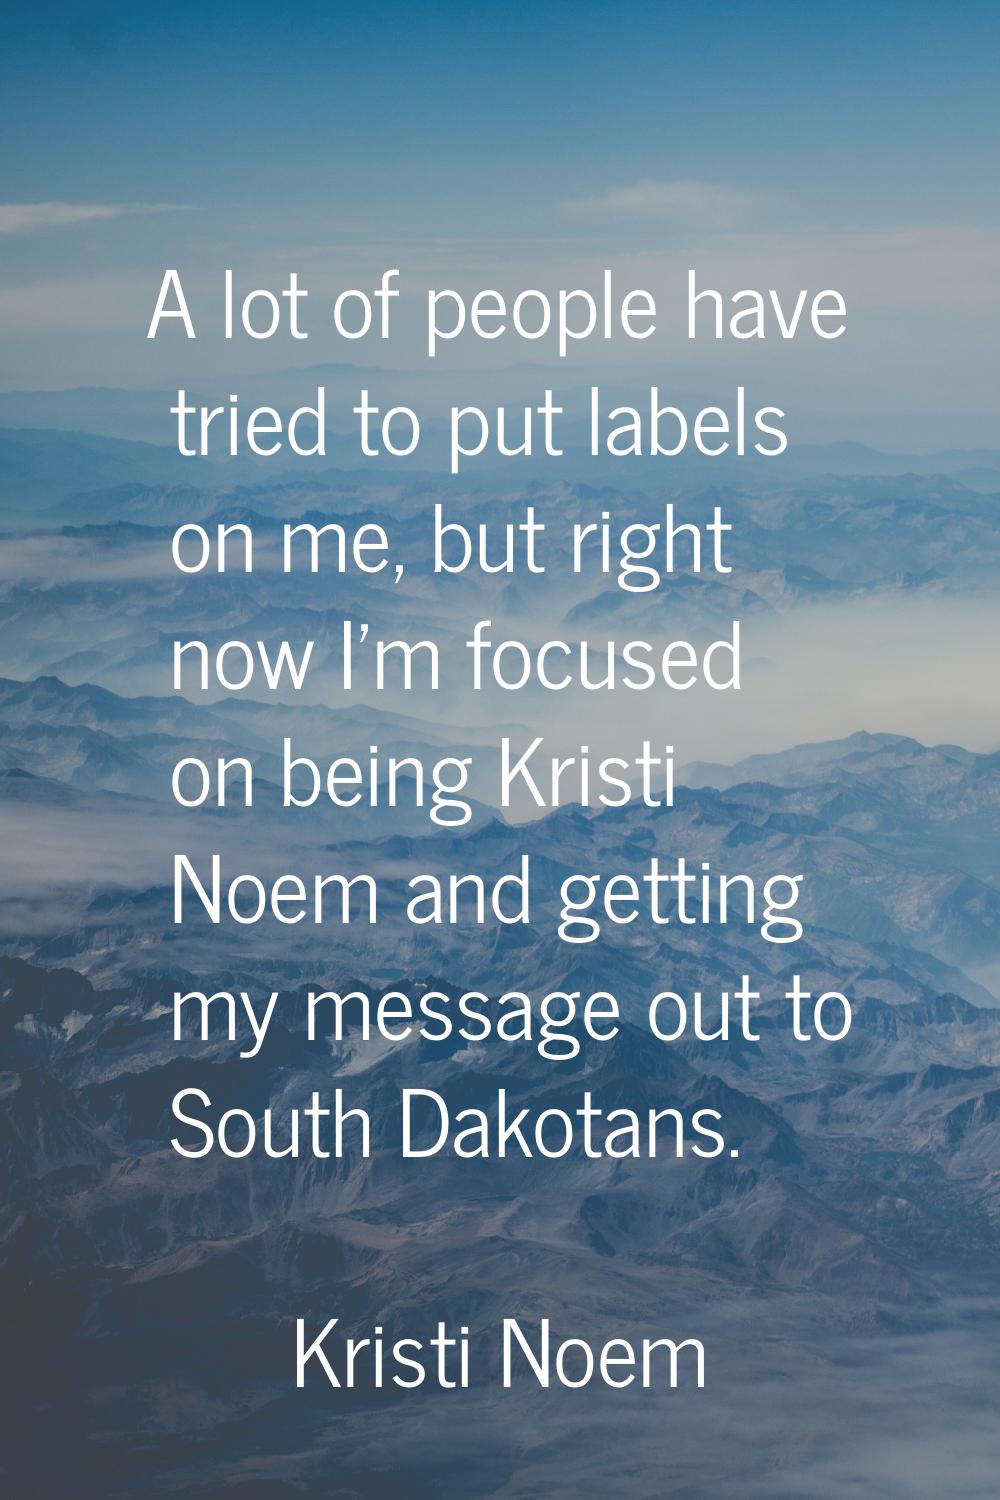 A lot of people have tried to put labels on me, but right now I'm focused on being Kristi Noem and 